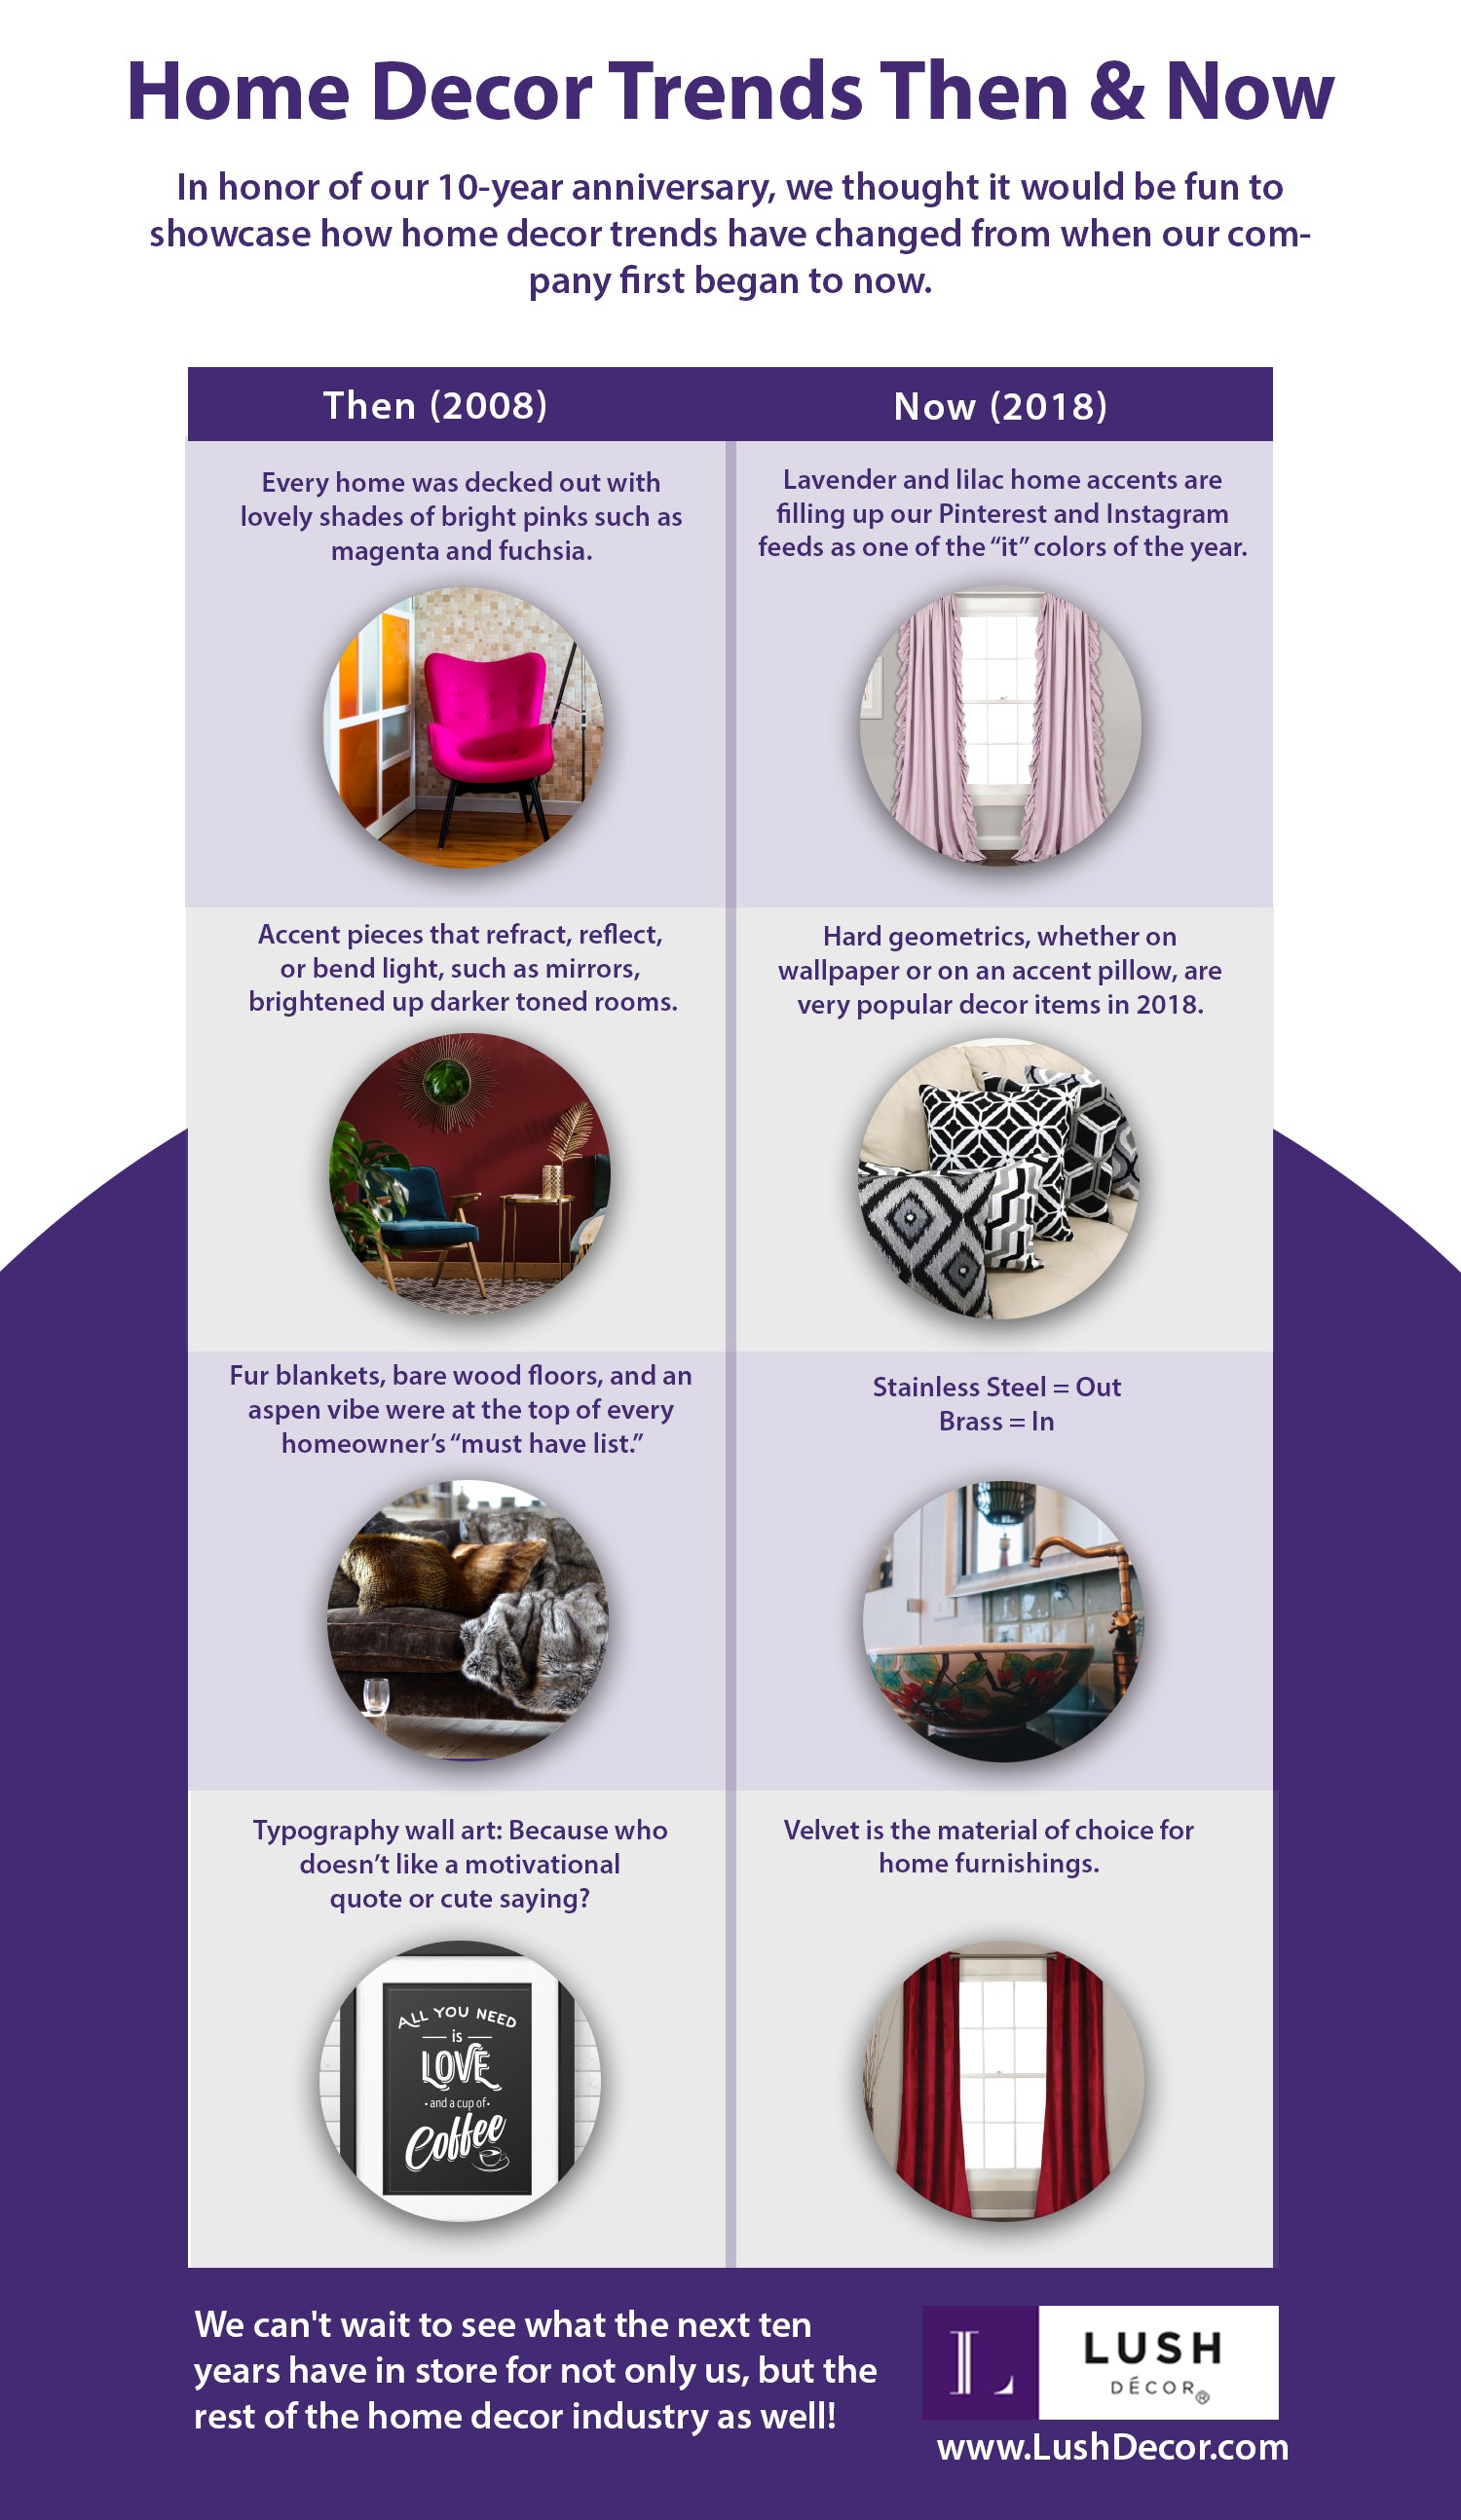 Home Decor Trends Then & Now Infographic